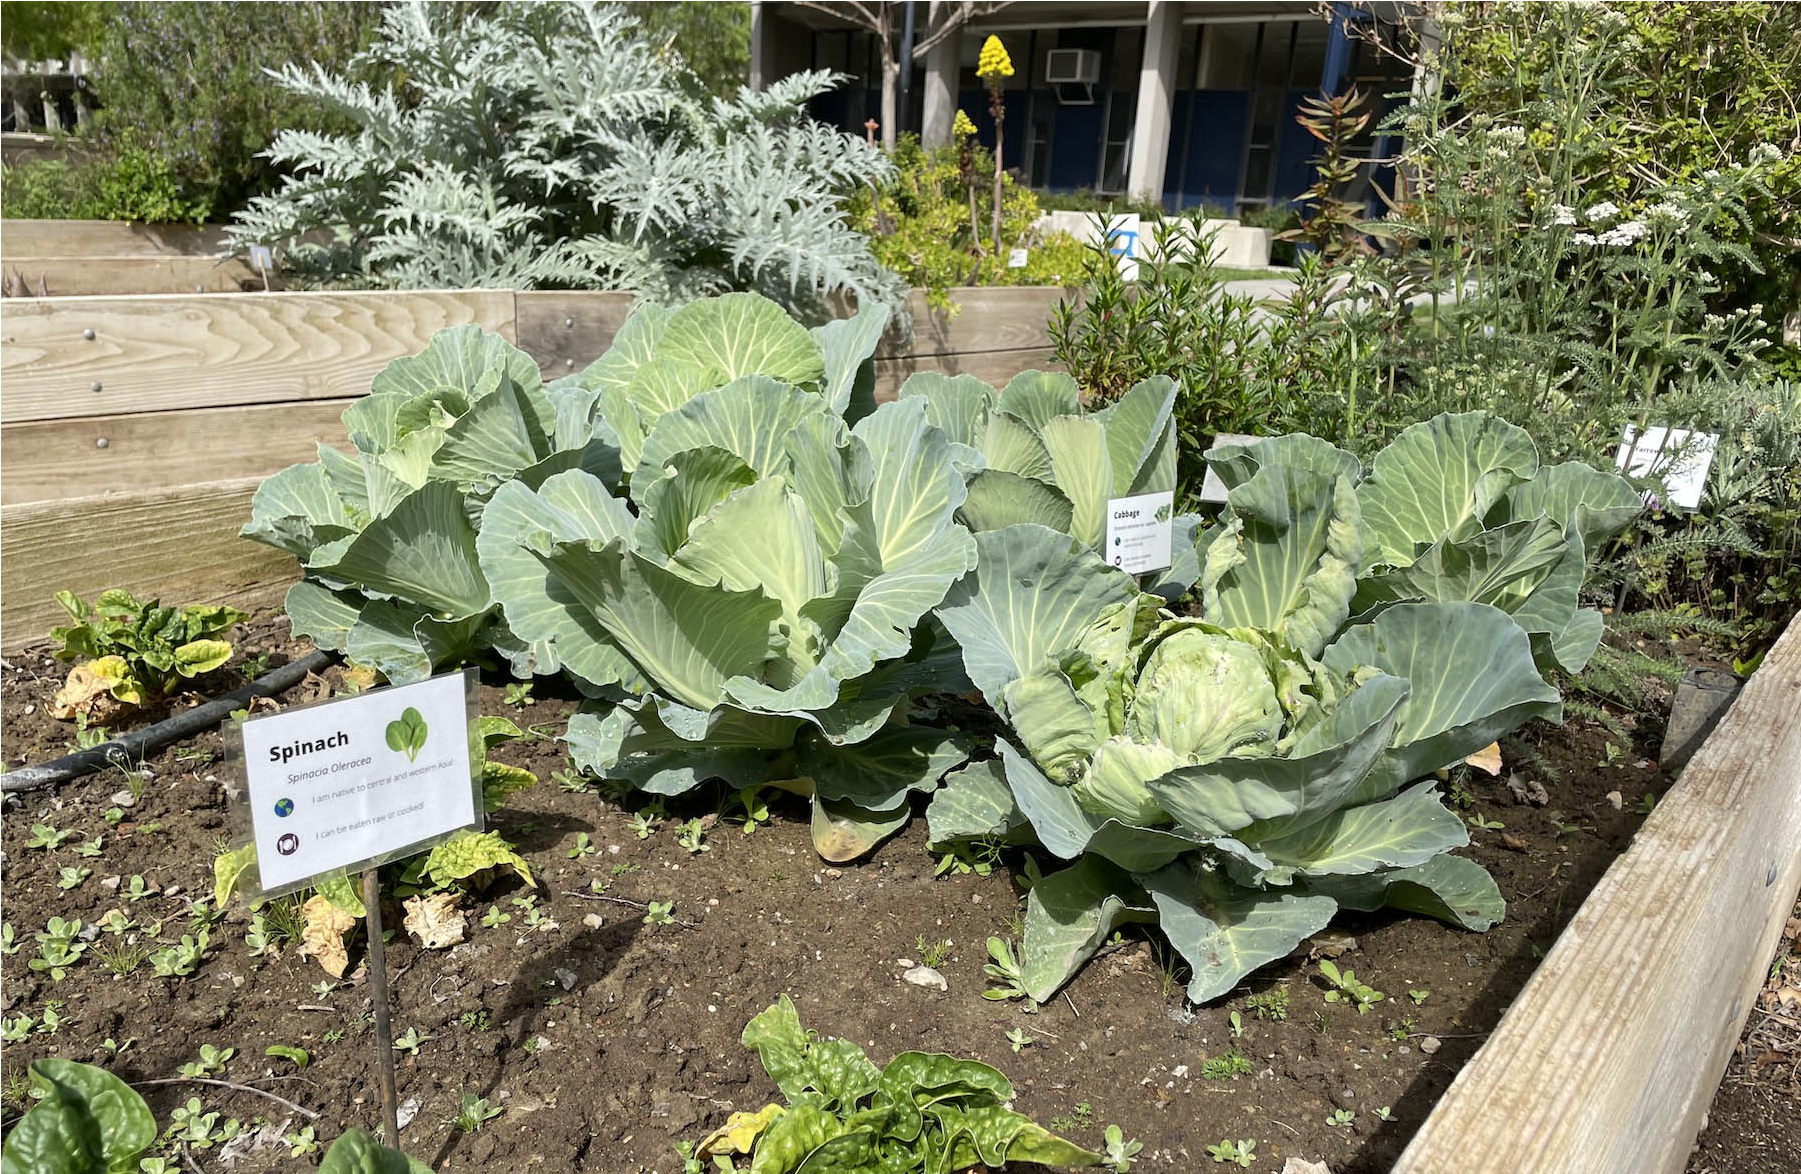 Cabbage and spinach grow in the student garden outside of the Segundo residence hall. (Emily C. Dooley)